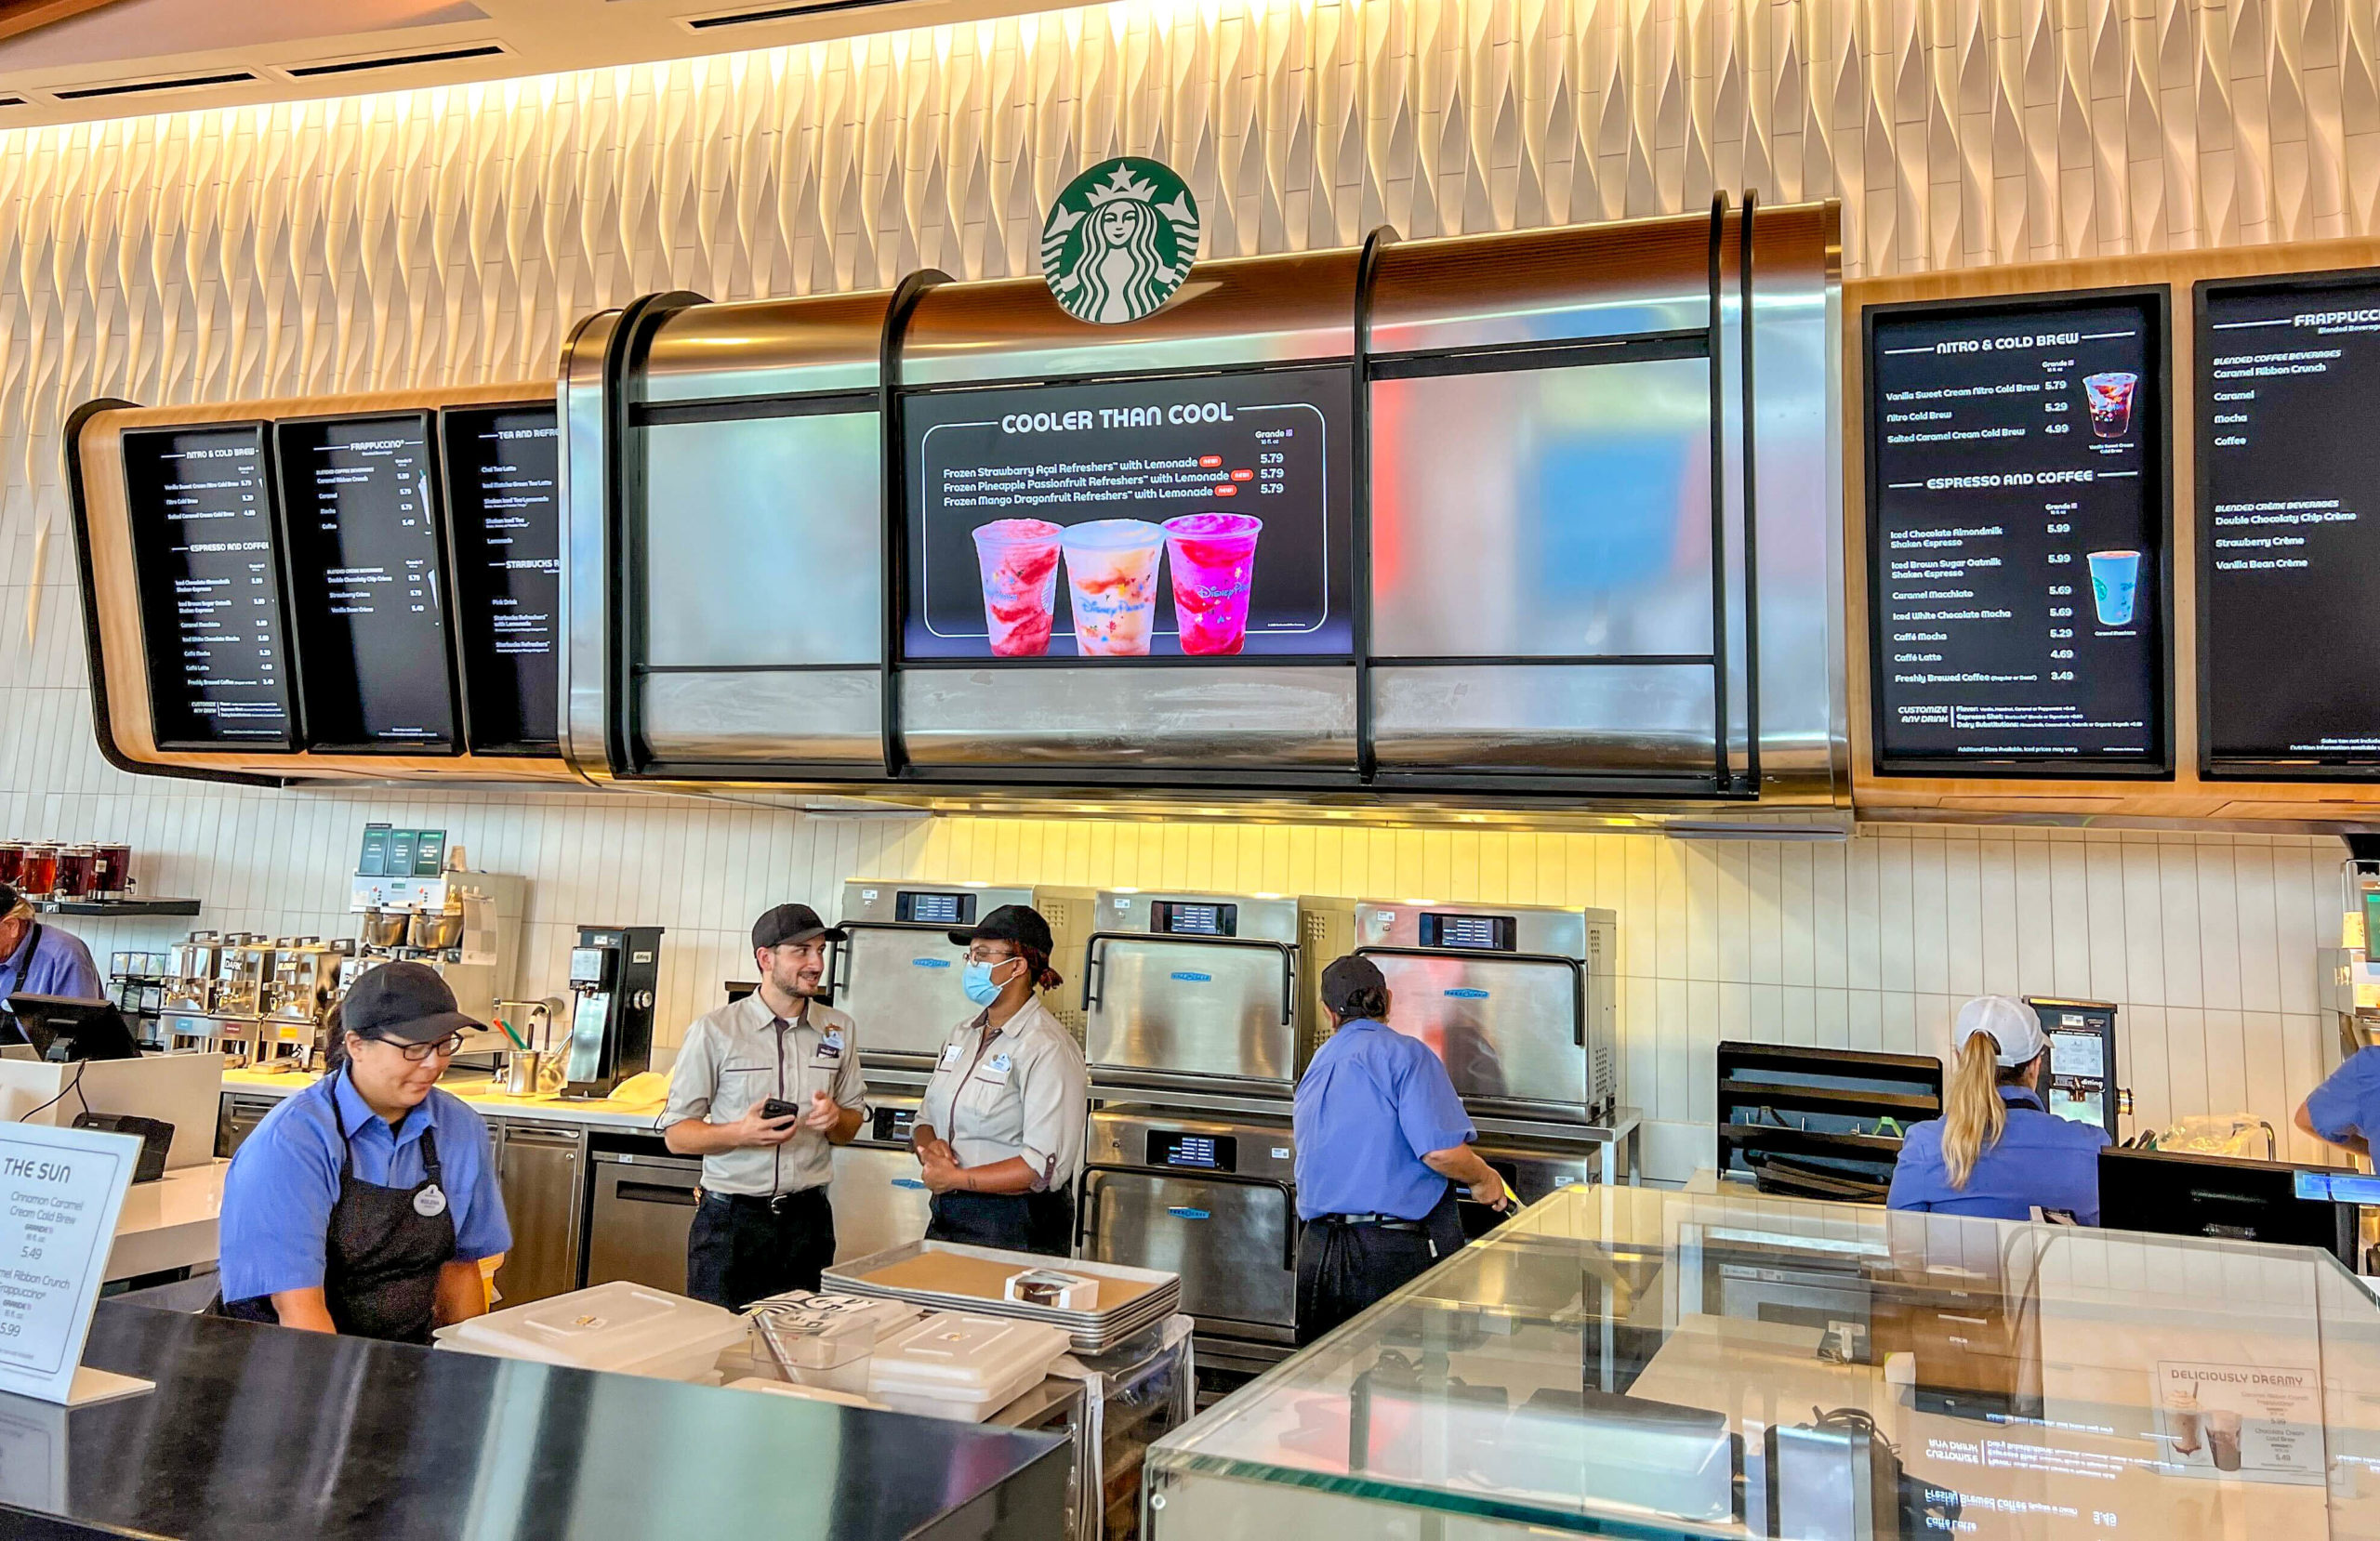 Starbucks in Connections Cafe